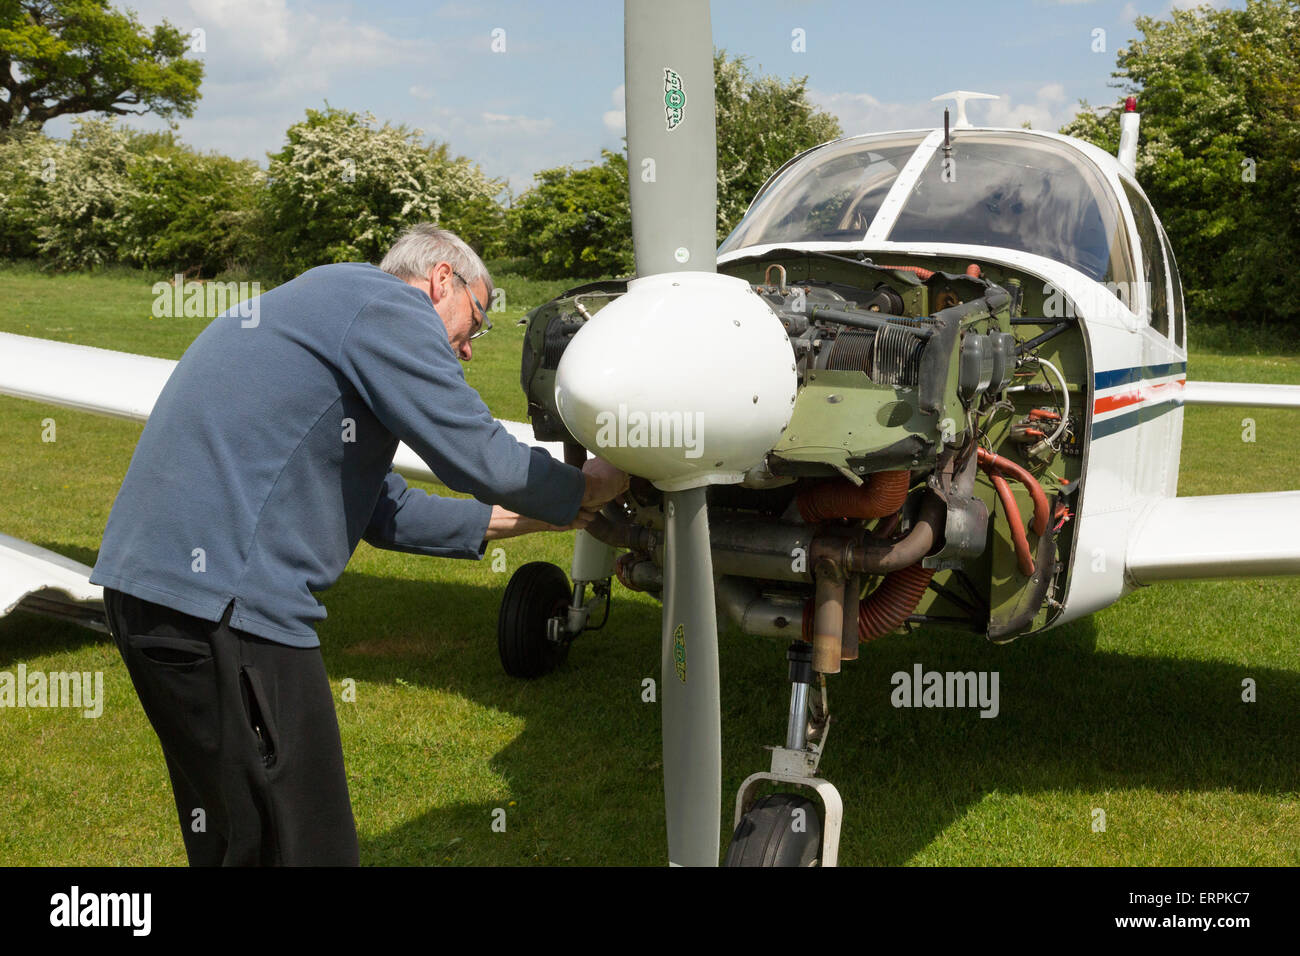 An engineer servicing a Piper PA28 aircraft engine Stock Photo